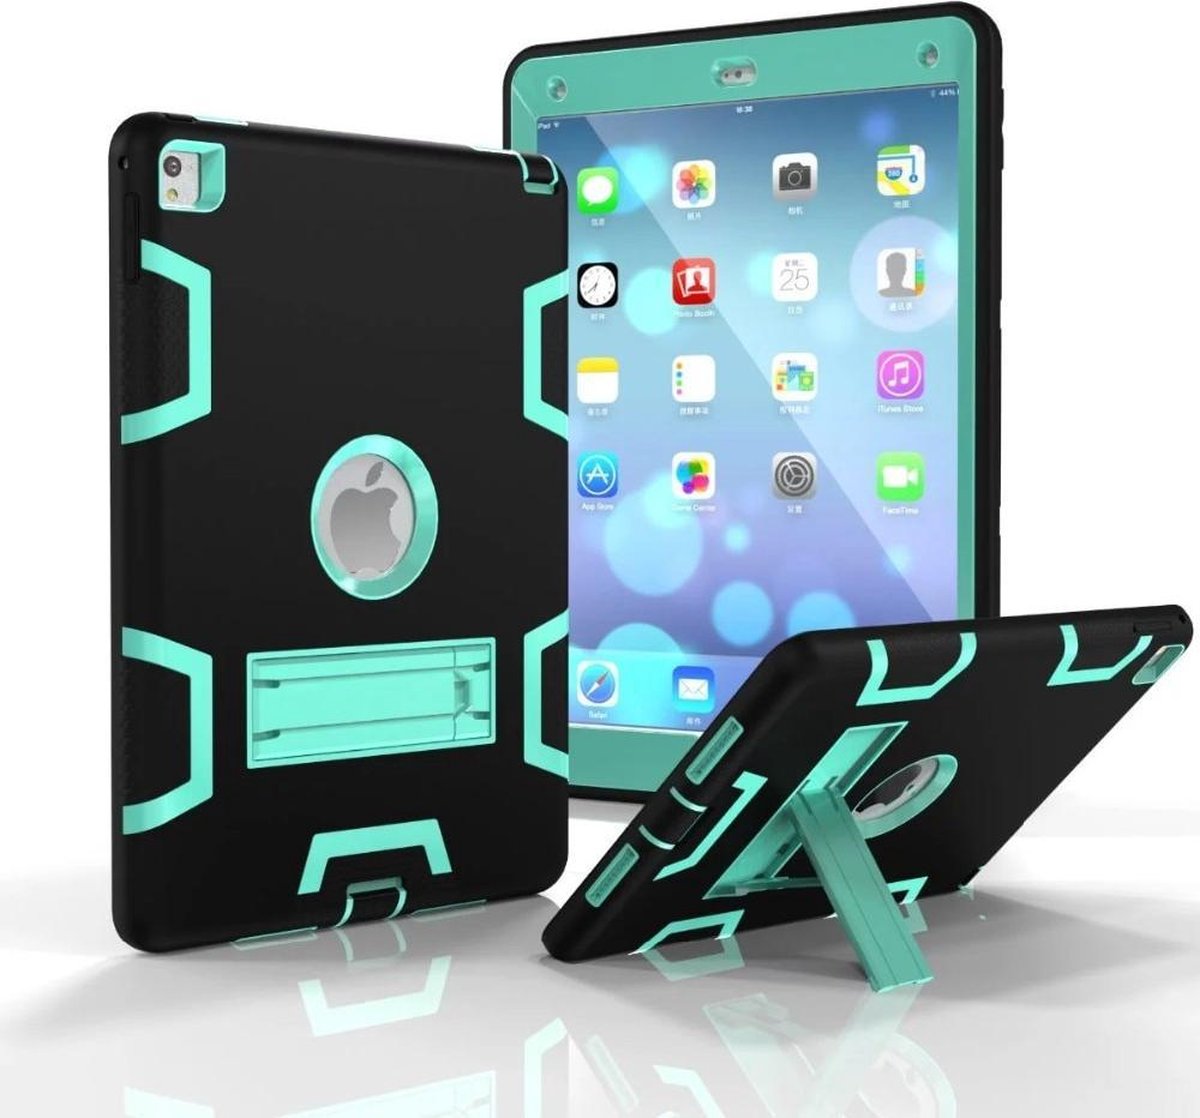 Shock Proof Standcase Hoes iPad Air 3 Case 10.5 inch 2019 / iPad Pro 10.5 inch 2017 - Zwart / Mint